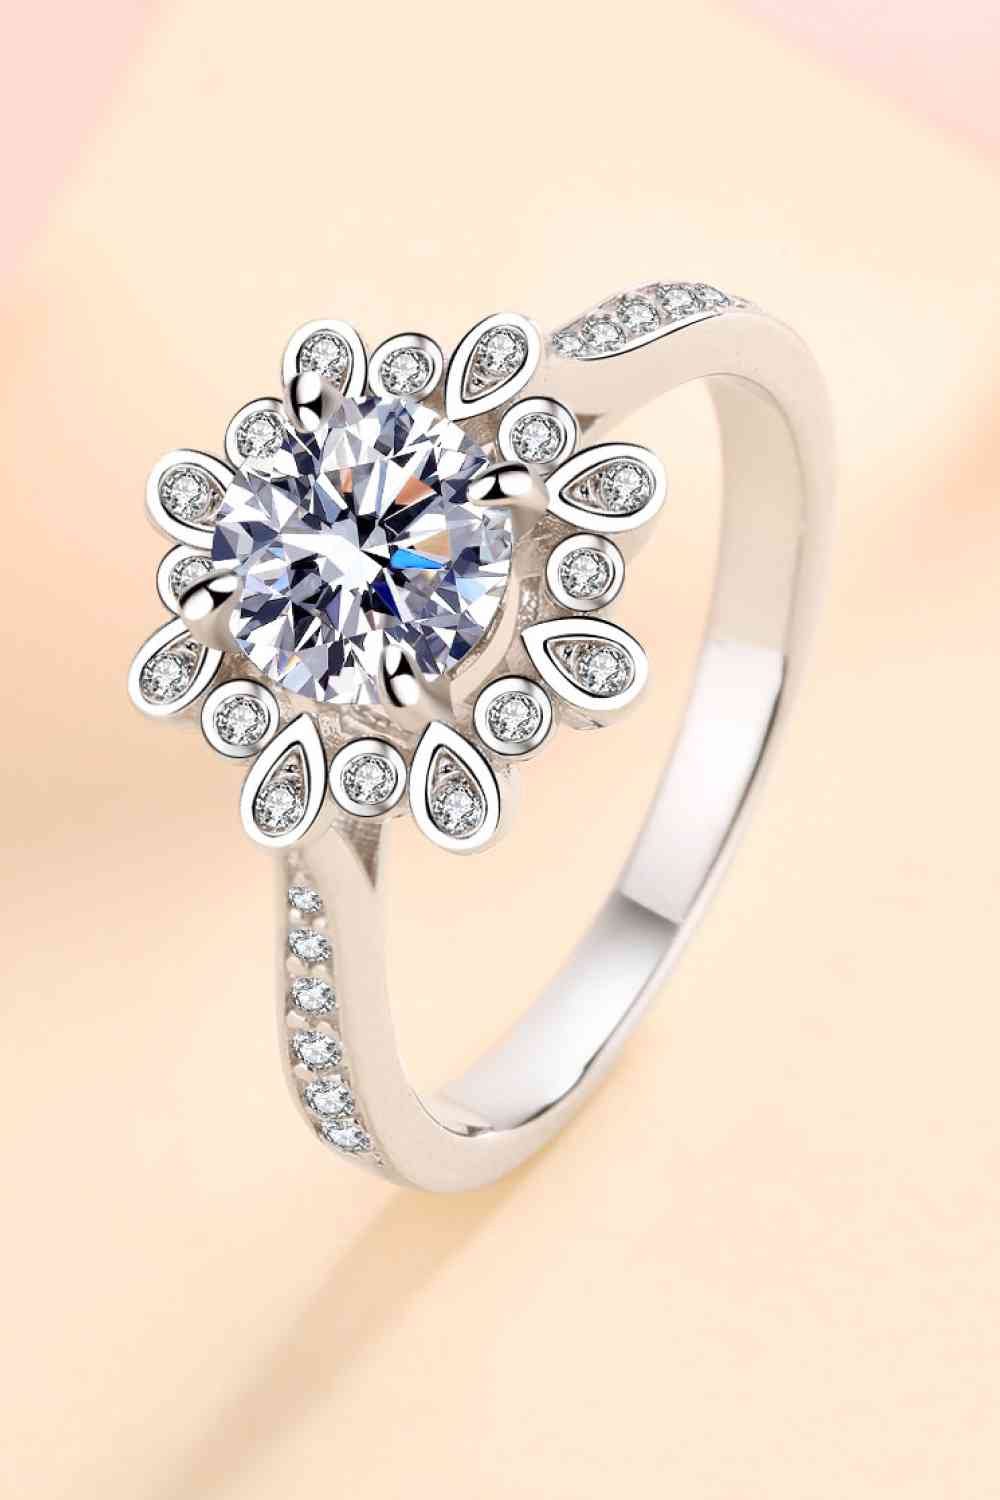 Can't Stop Your Shine 925 Sterling Silver Moissanite Ring - lolaluxeshop